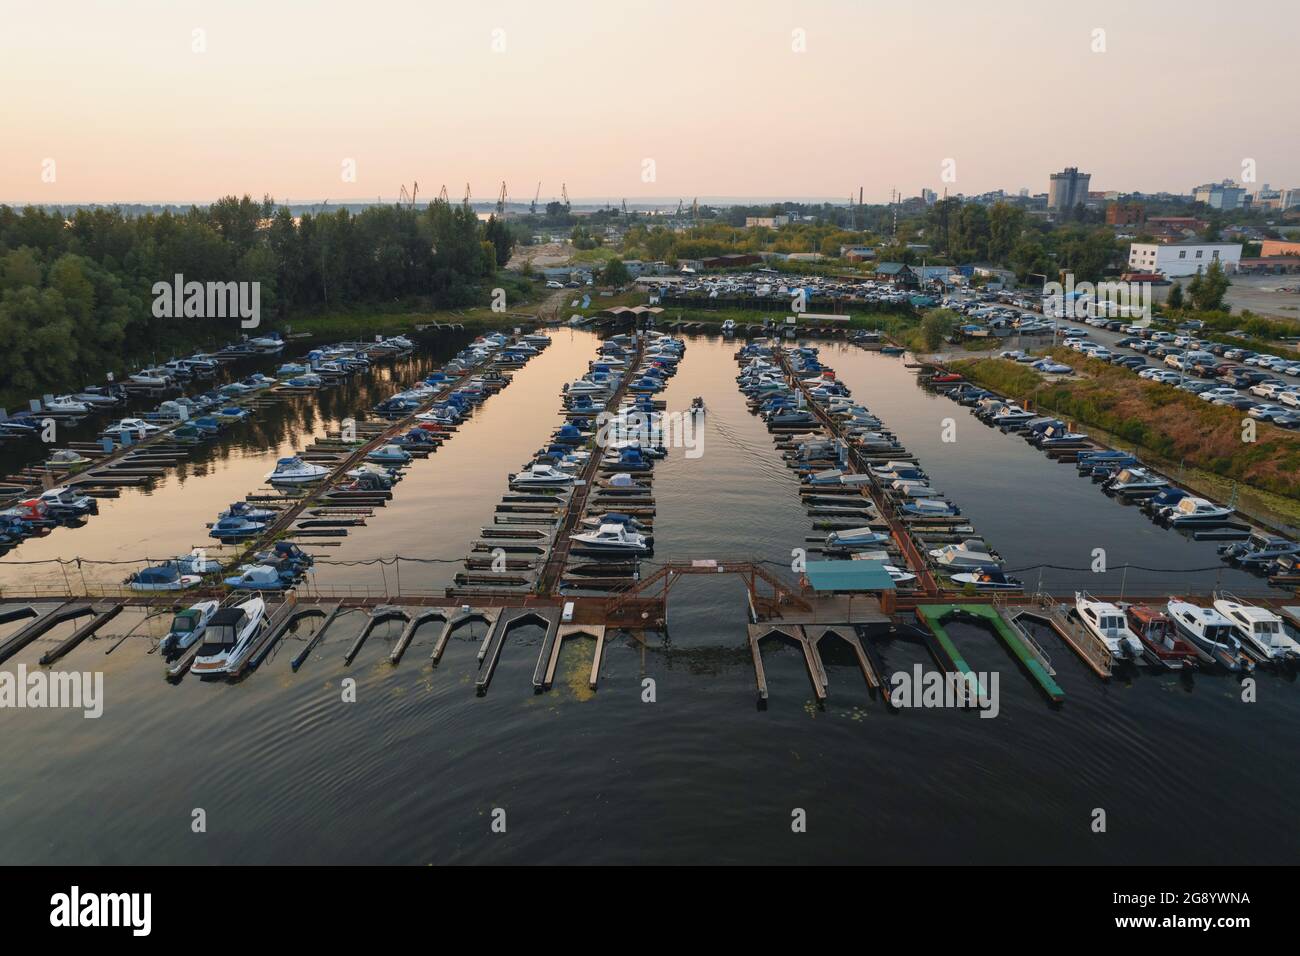 Commercial motor boat parking, small river port or boat station Stock Photo